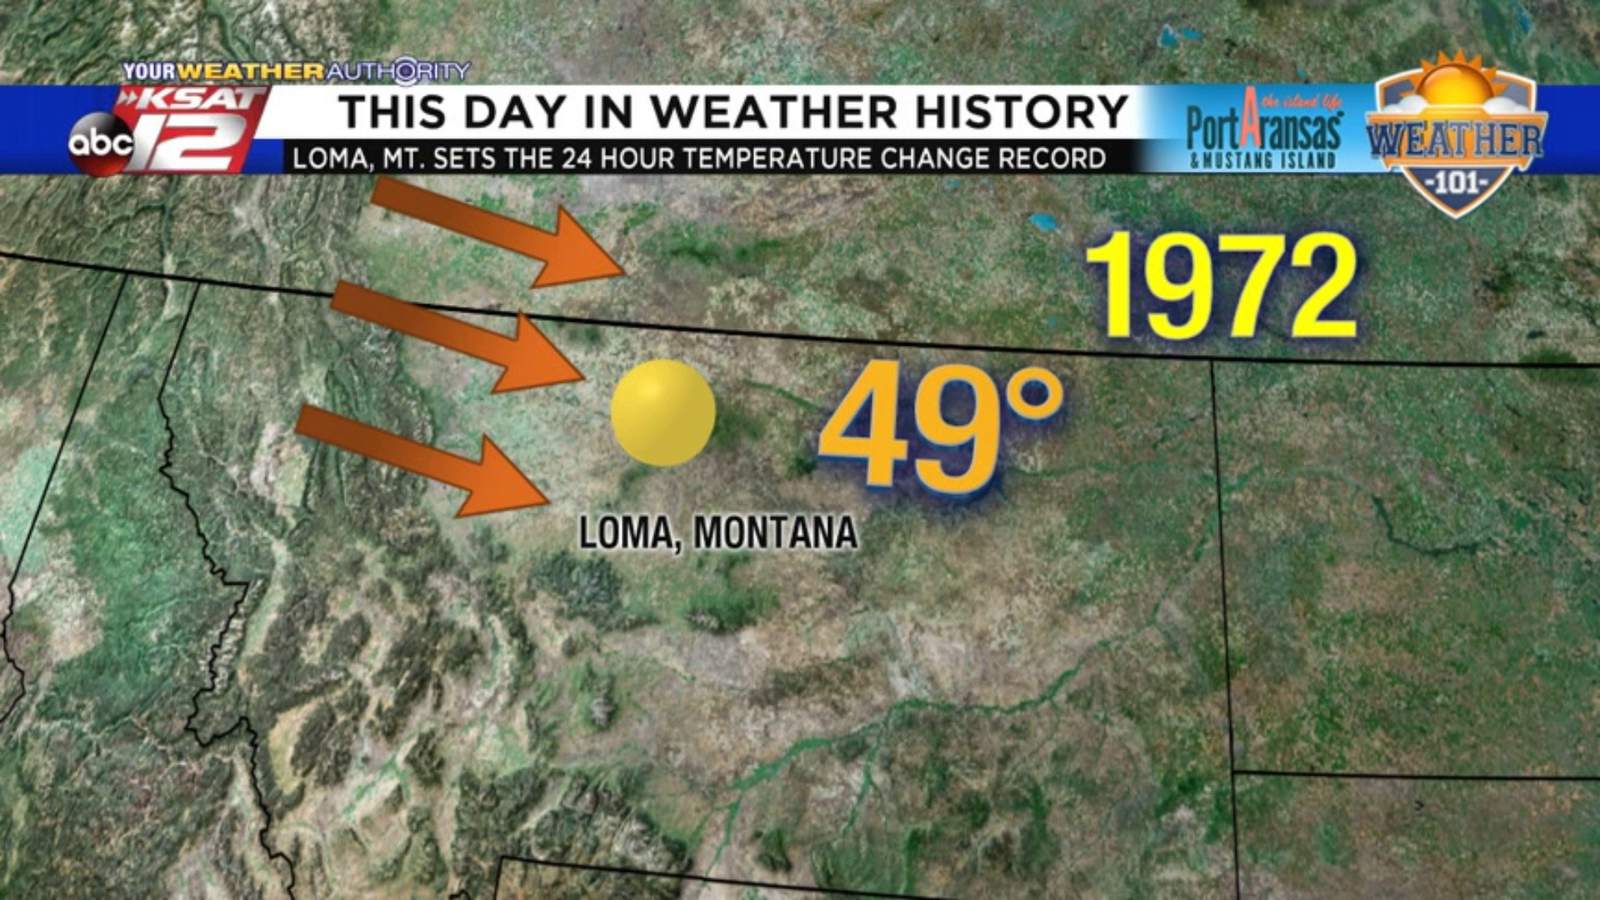 This day in weather history: January 14th